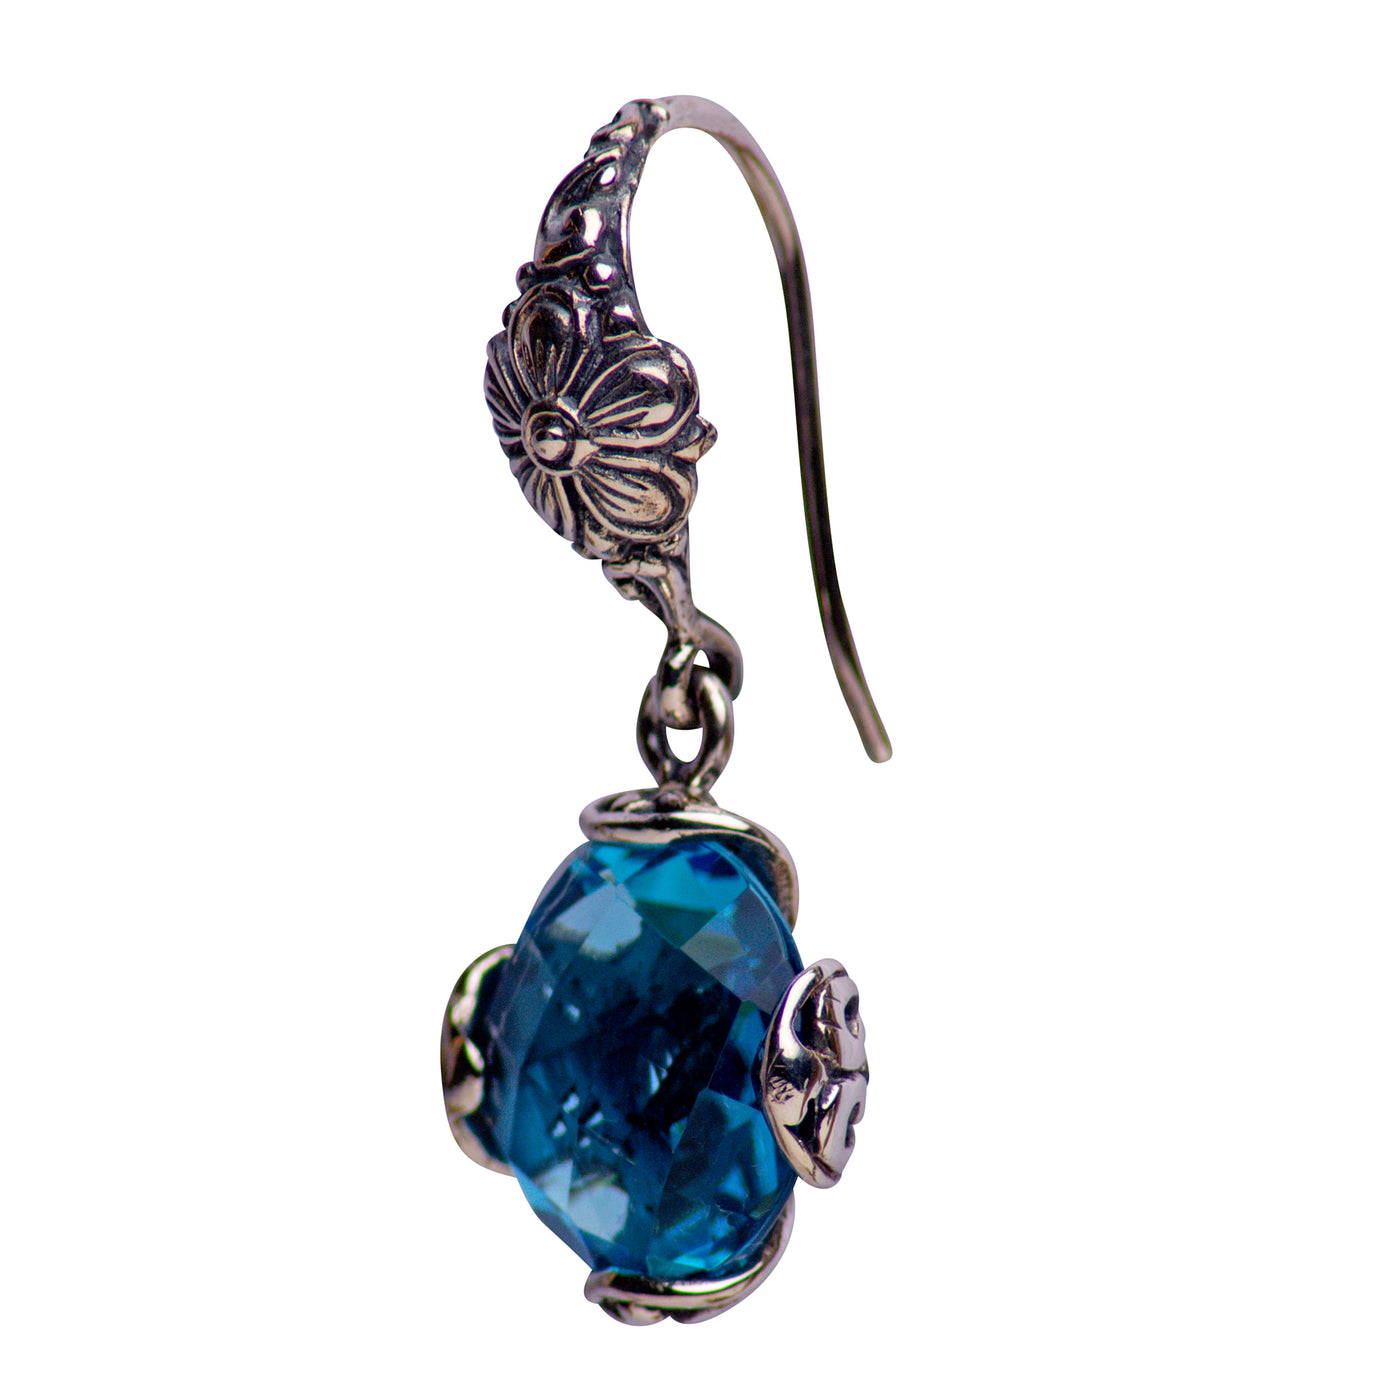 Floral Blue Topaz Quartz and Sterling Silver Dangle Earrings